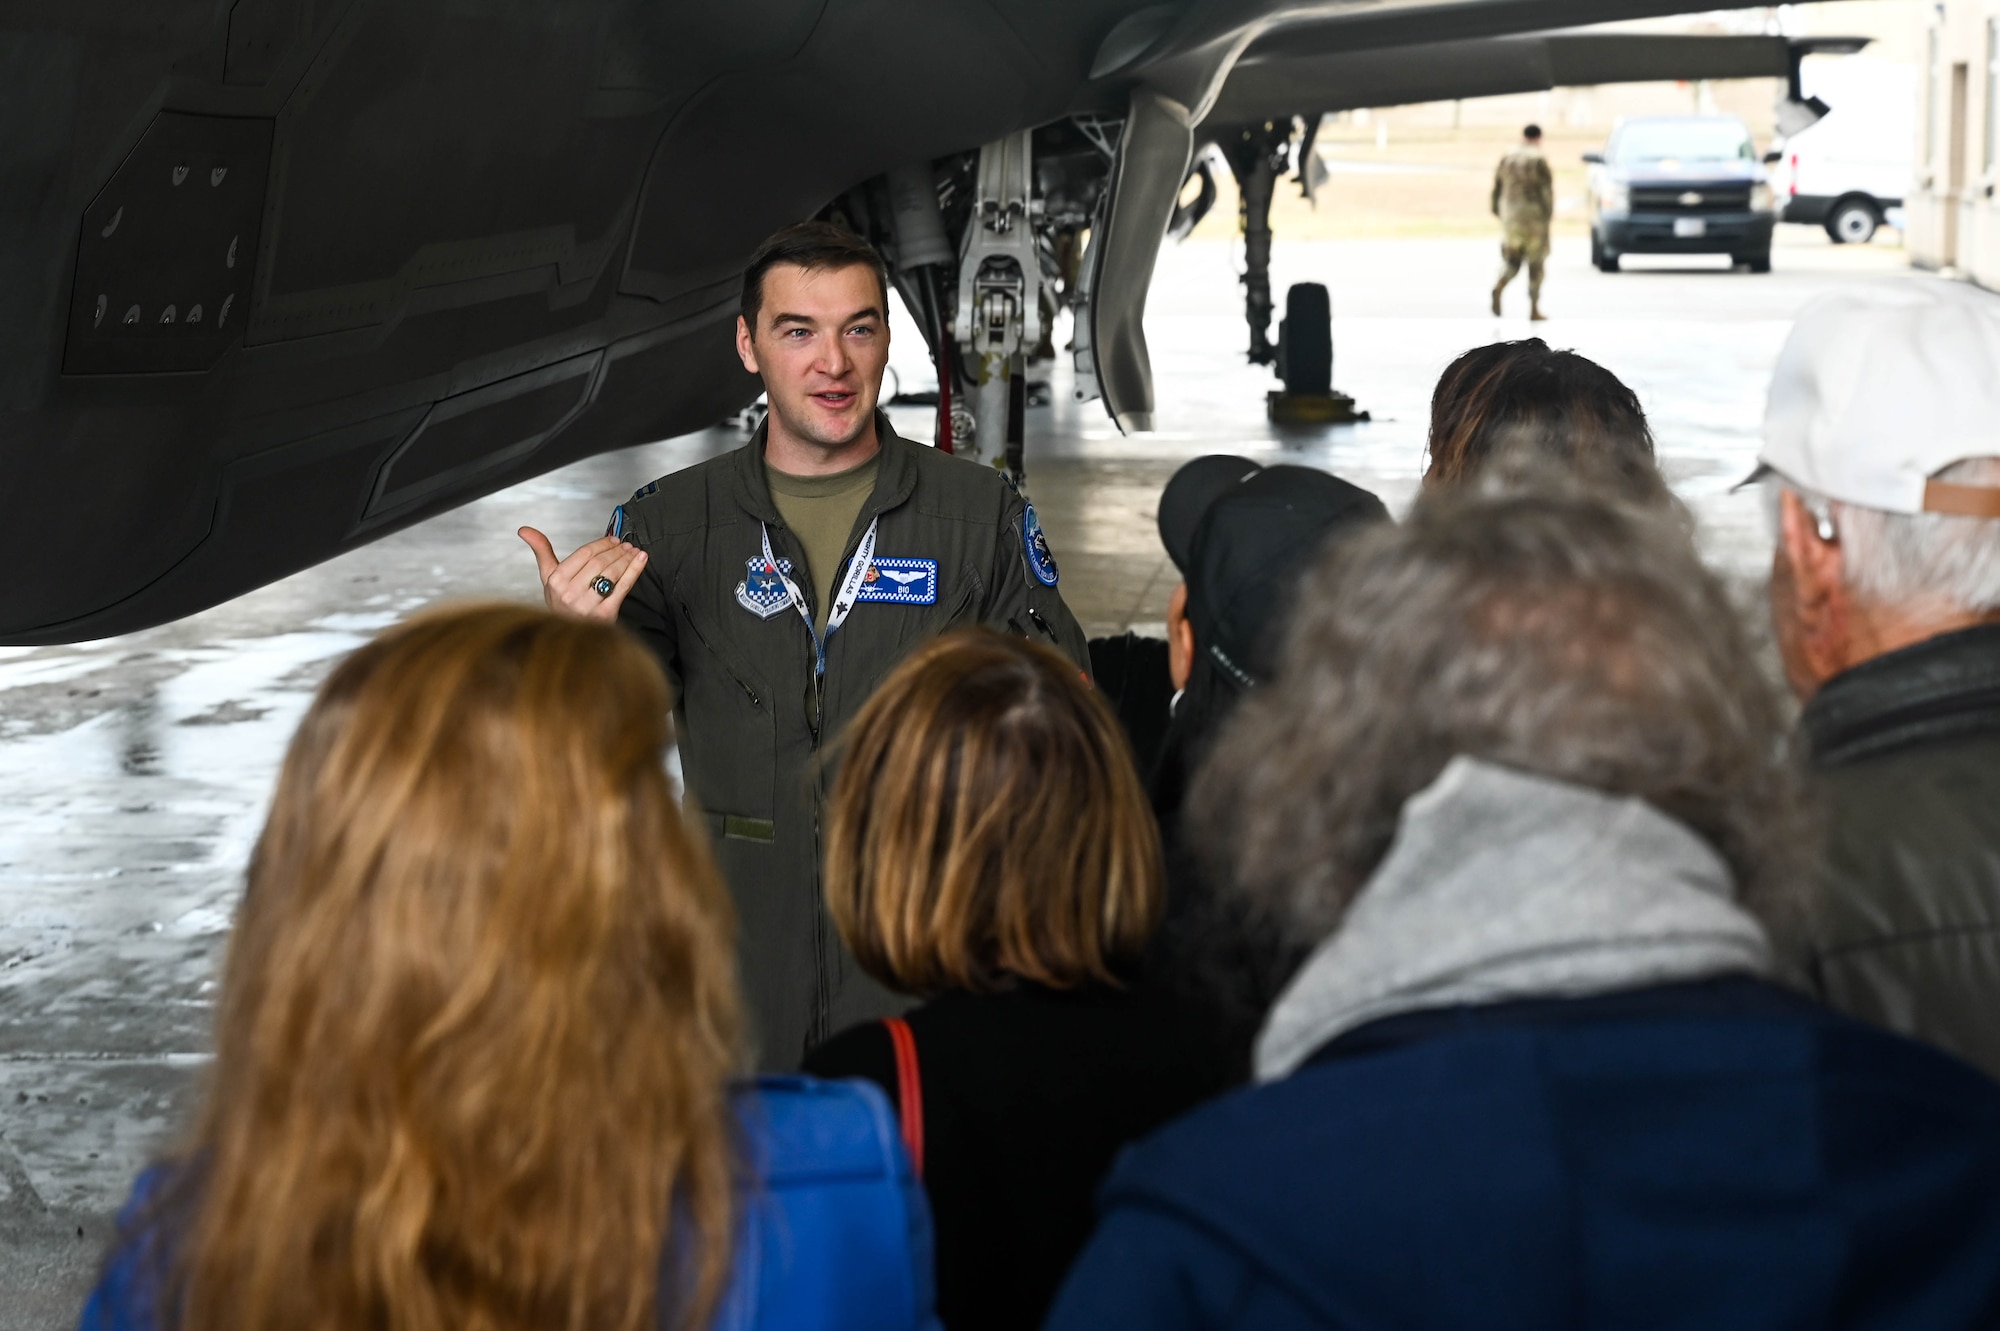 United States Air Force Academy class of 1959 toured the 33rd Fighter Wing and received a mission brief, viewed an F-35 and toured the Academic Training Center.